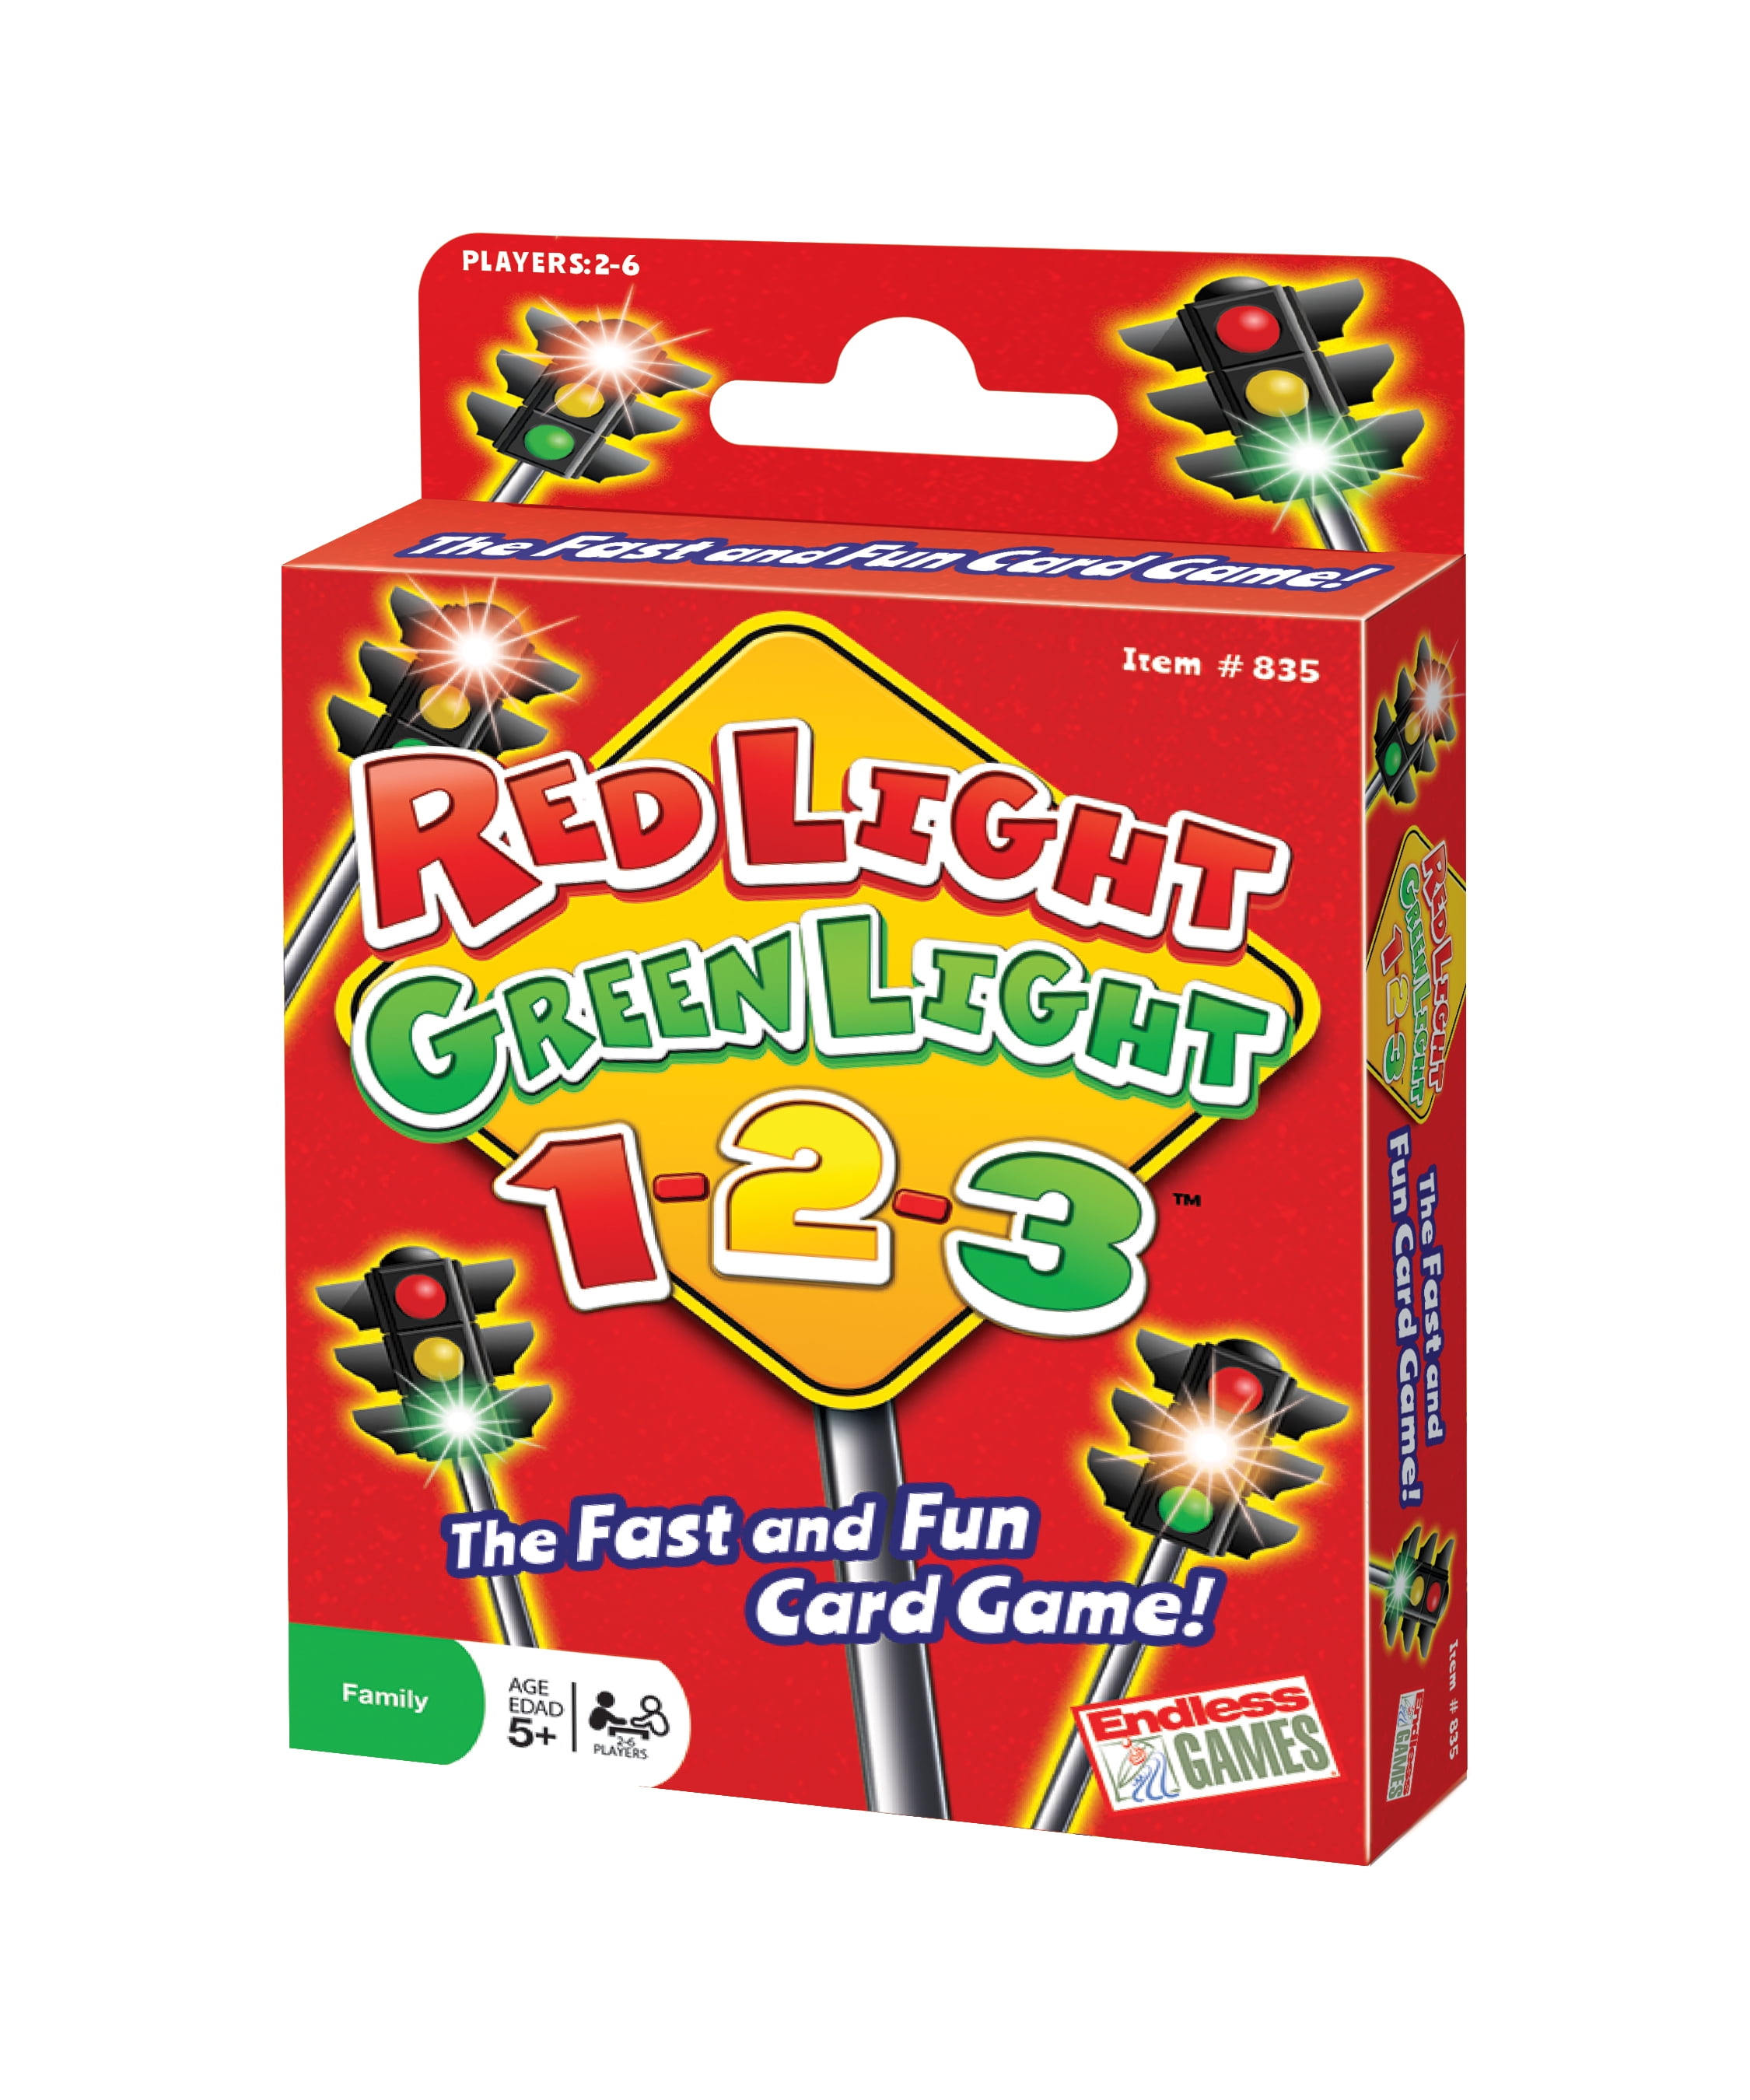 Red Light Green Light, 1-2-3 the Fast and Fun Card Game, Children Ages 5+